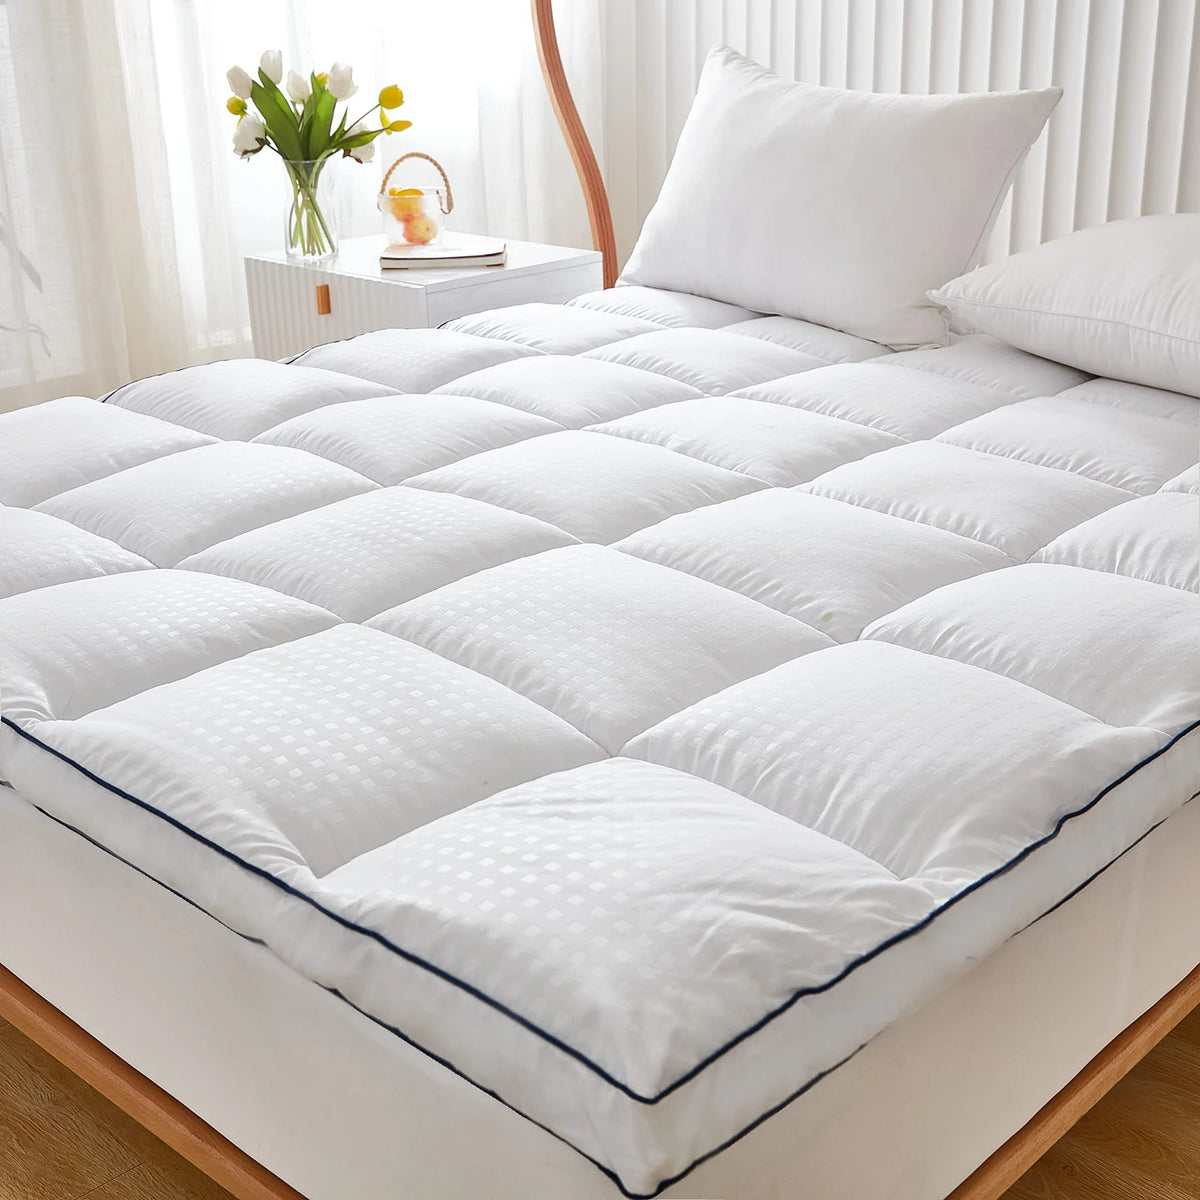 Extra Thick Cooling Mattress Topper Pad Cover